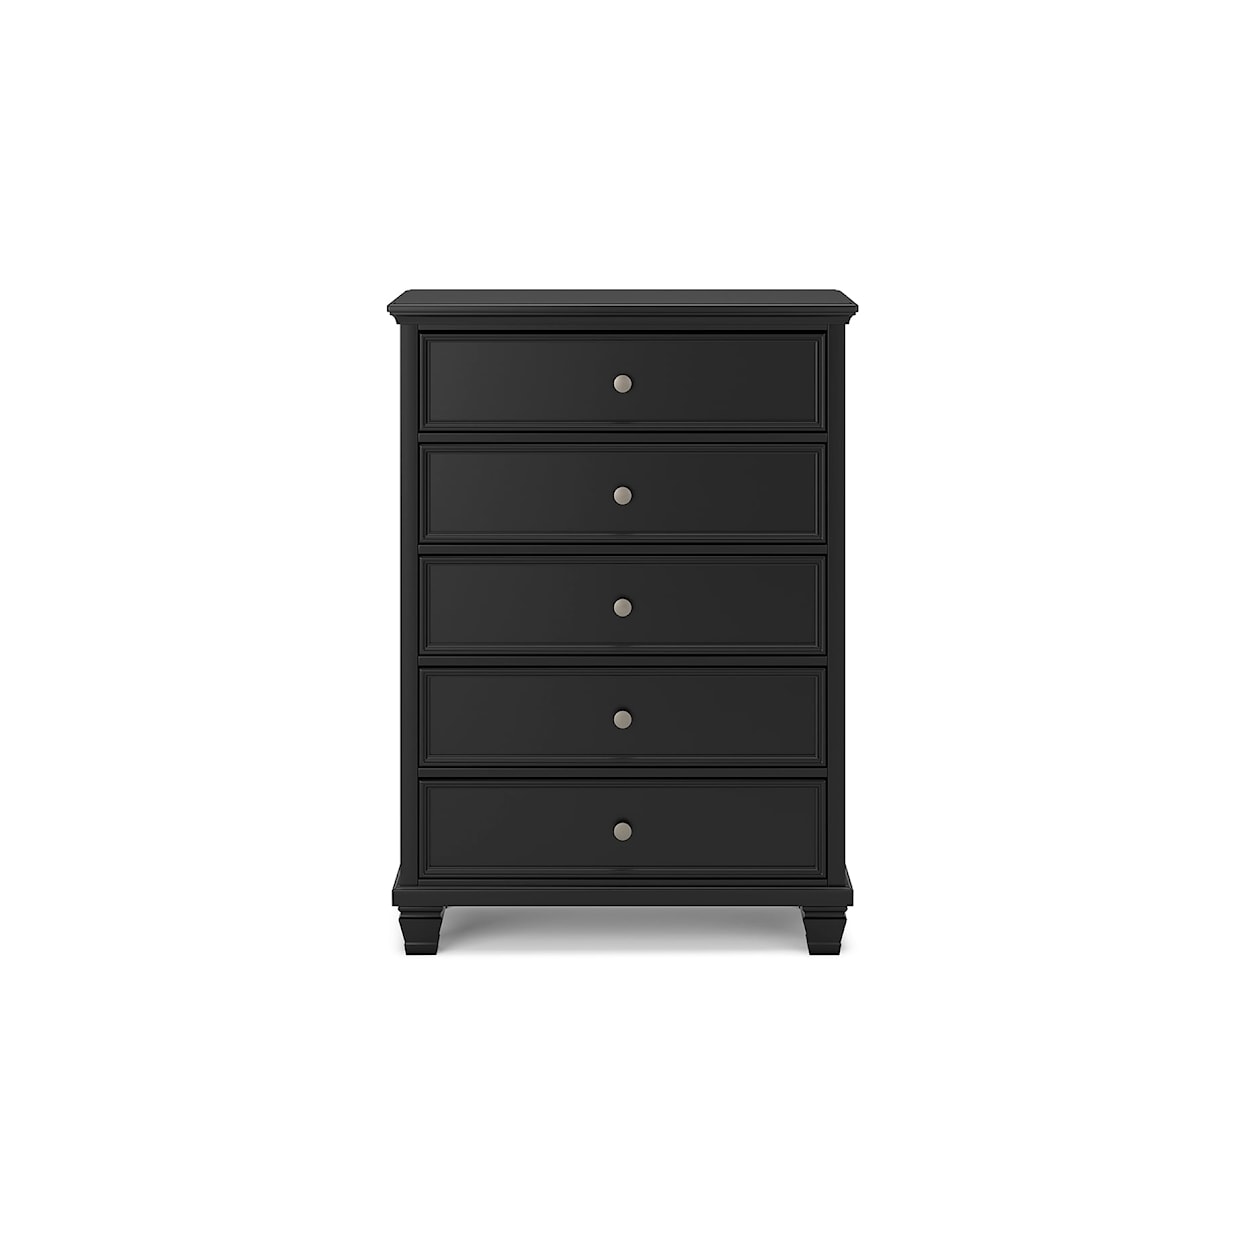 Signature Design by Ashley Lanolee 5-Drawer Chest